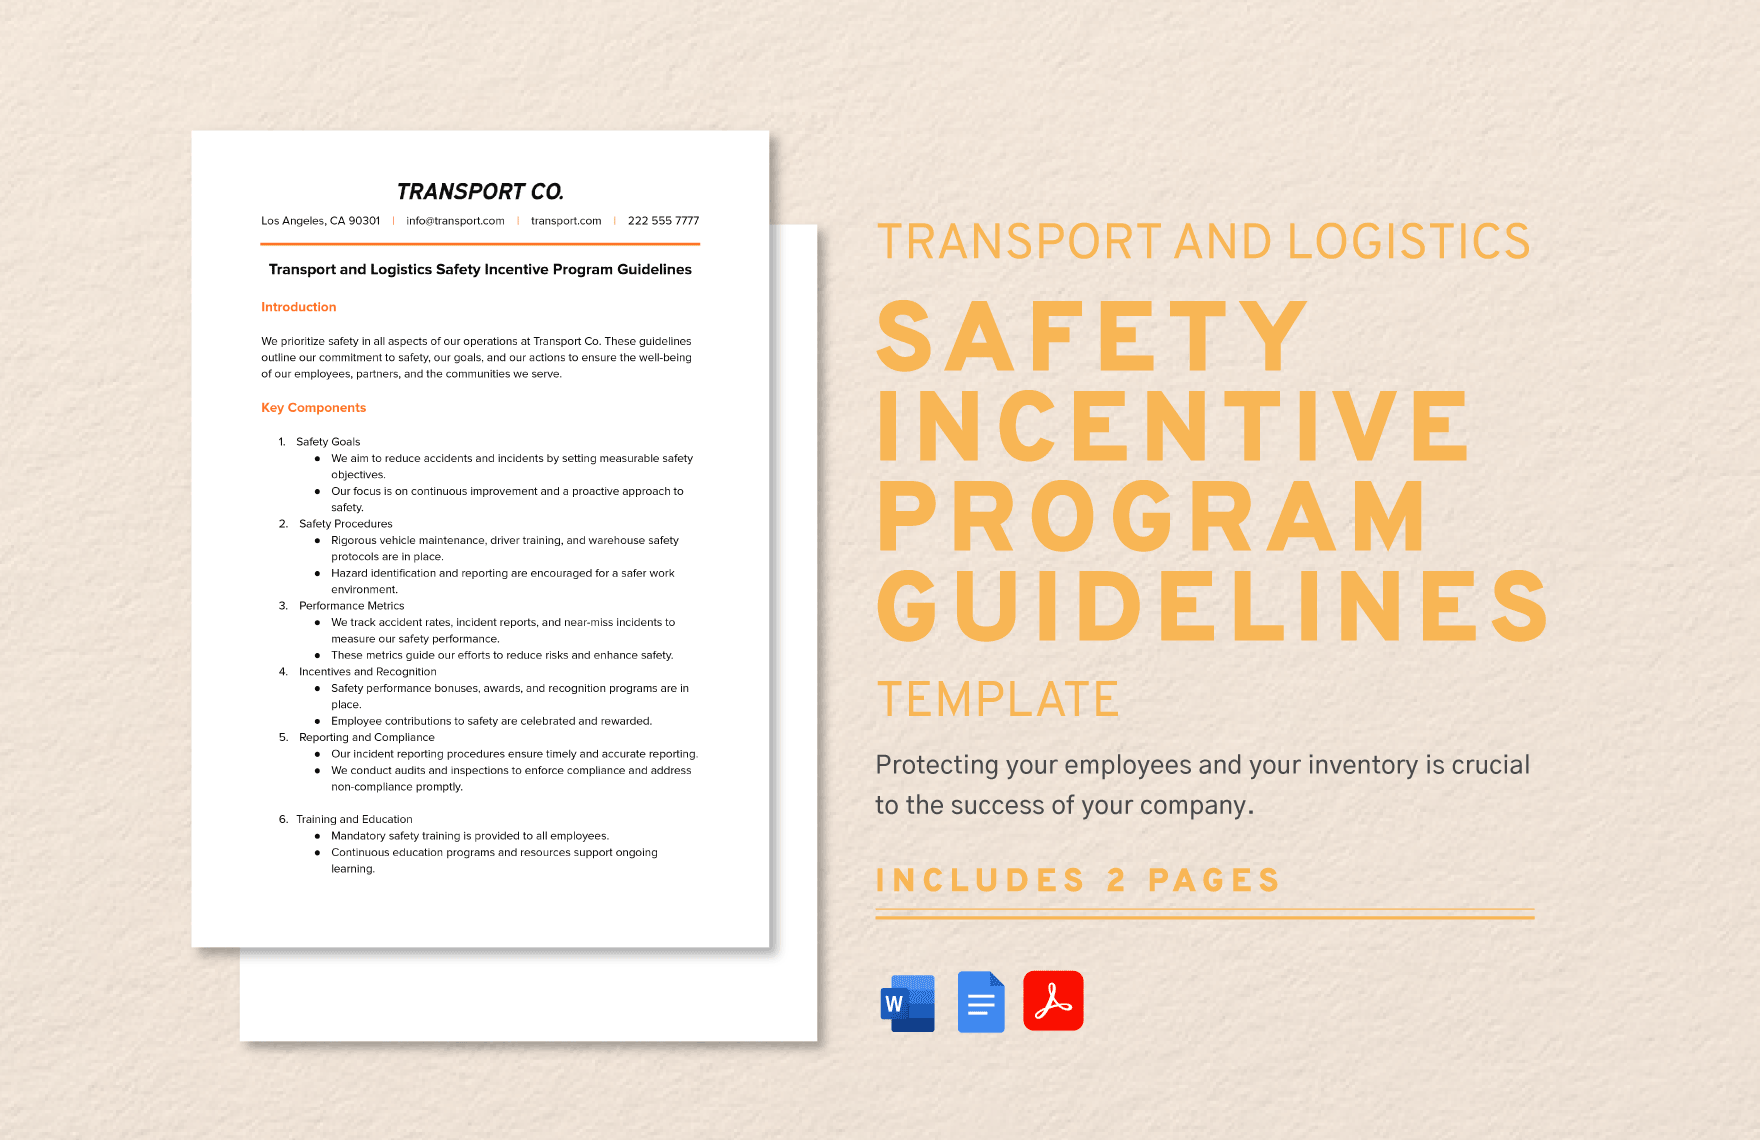 Transport and Logistics Safety Incentive Program Guidelines Template